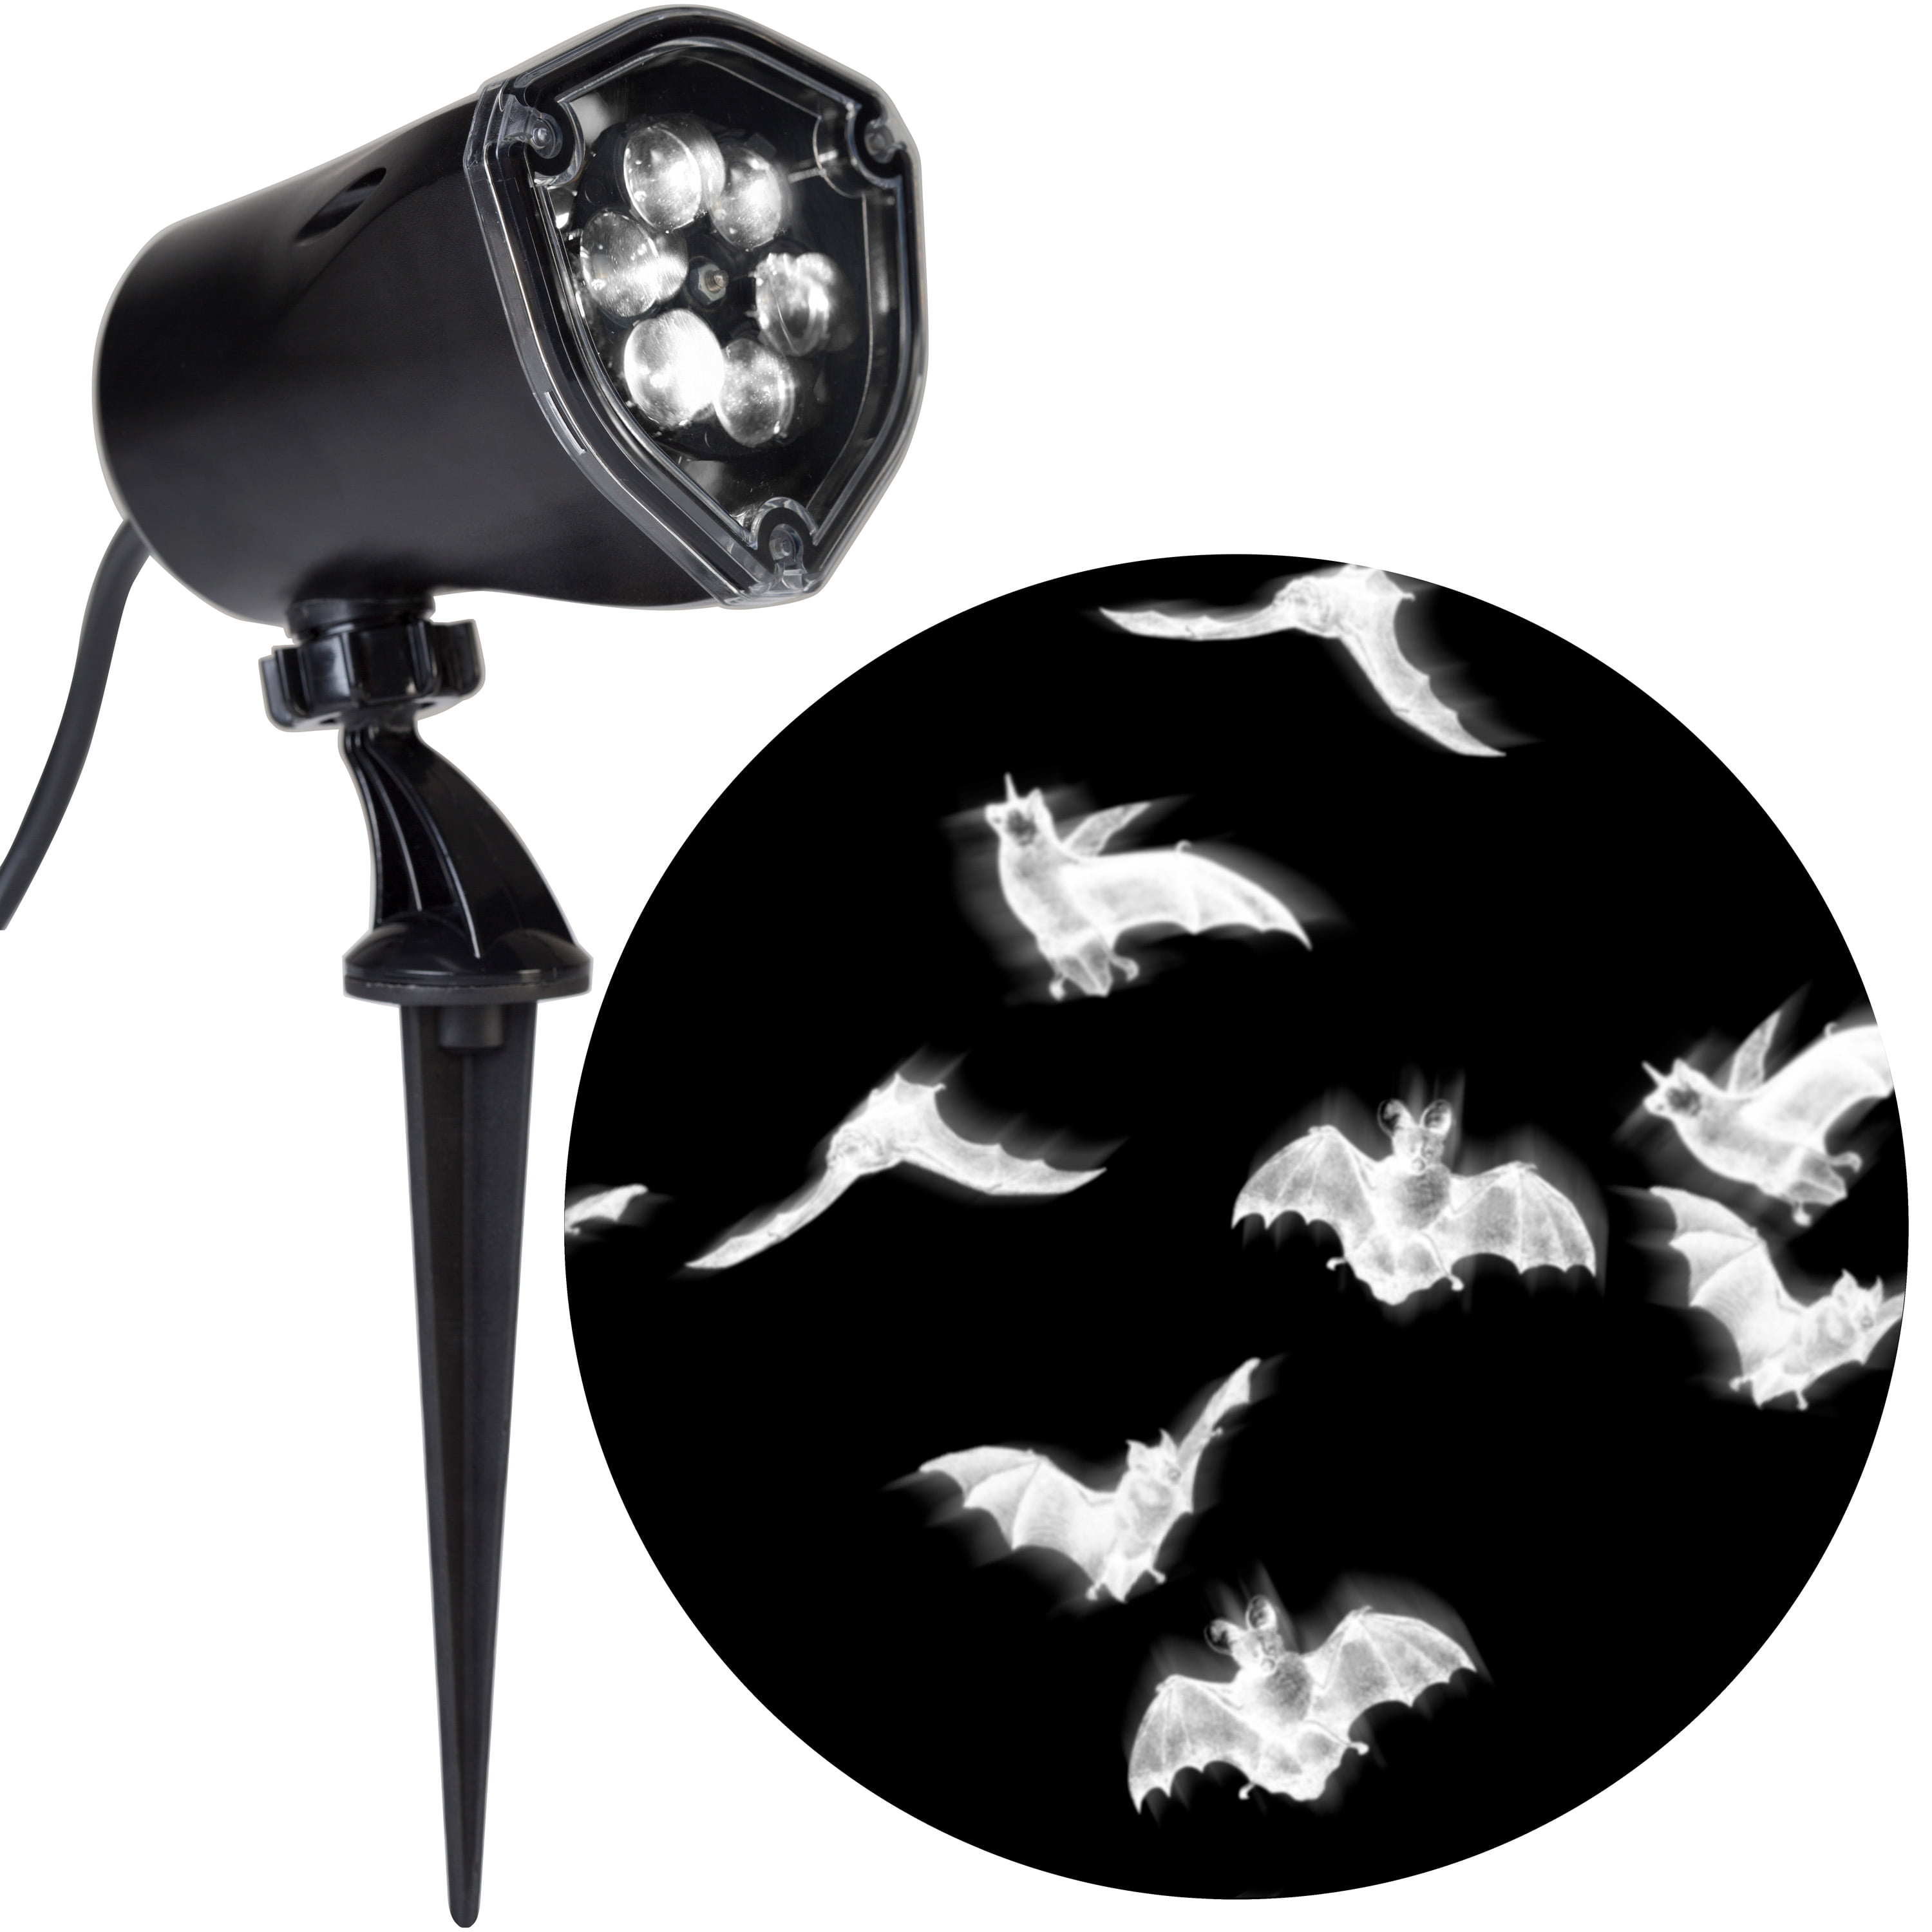 White Projector,Bright LED Halloween Bats Projection,Outdoor Yard,Lighting Decor 